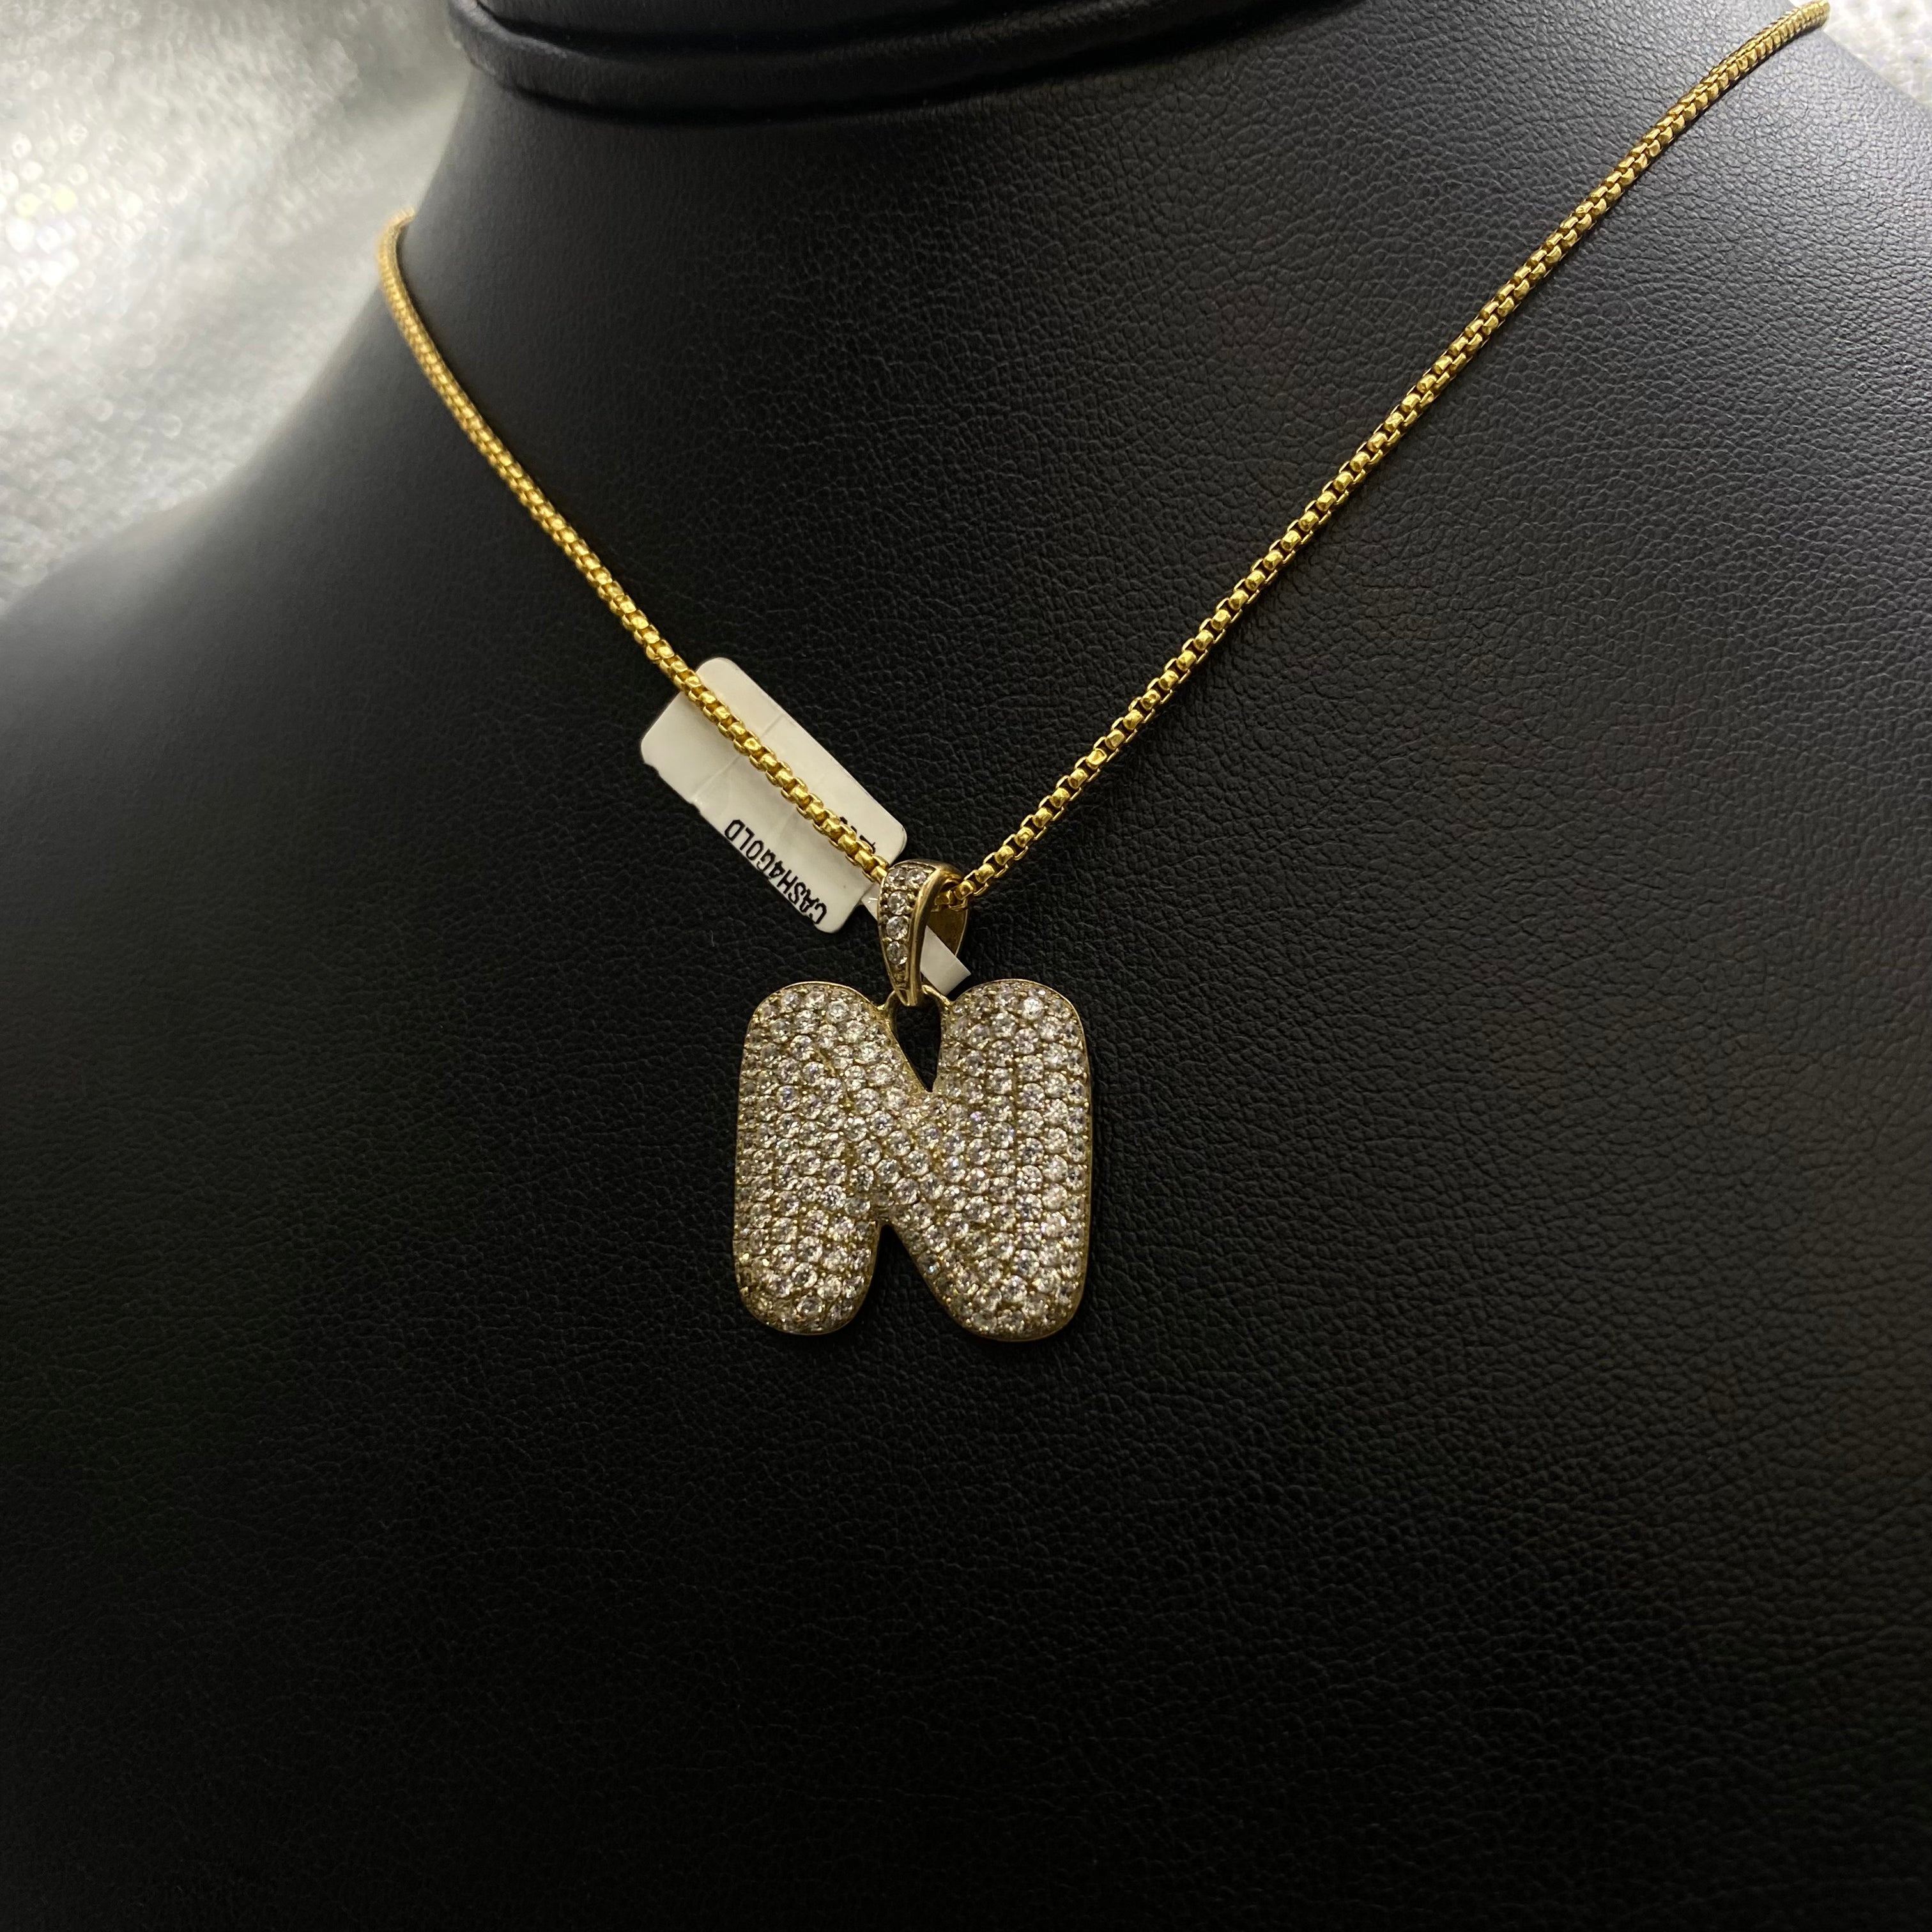 Letter N Pendant 10K Yellow Gold With Zirconia / 5.5gr